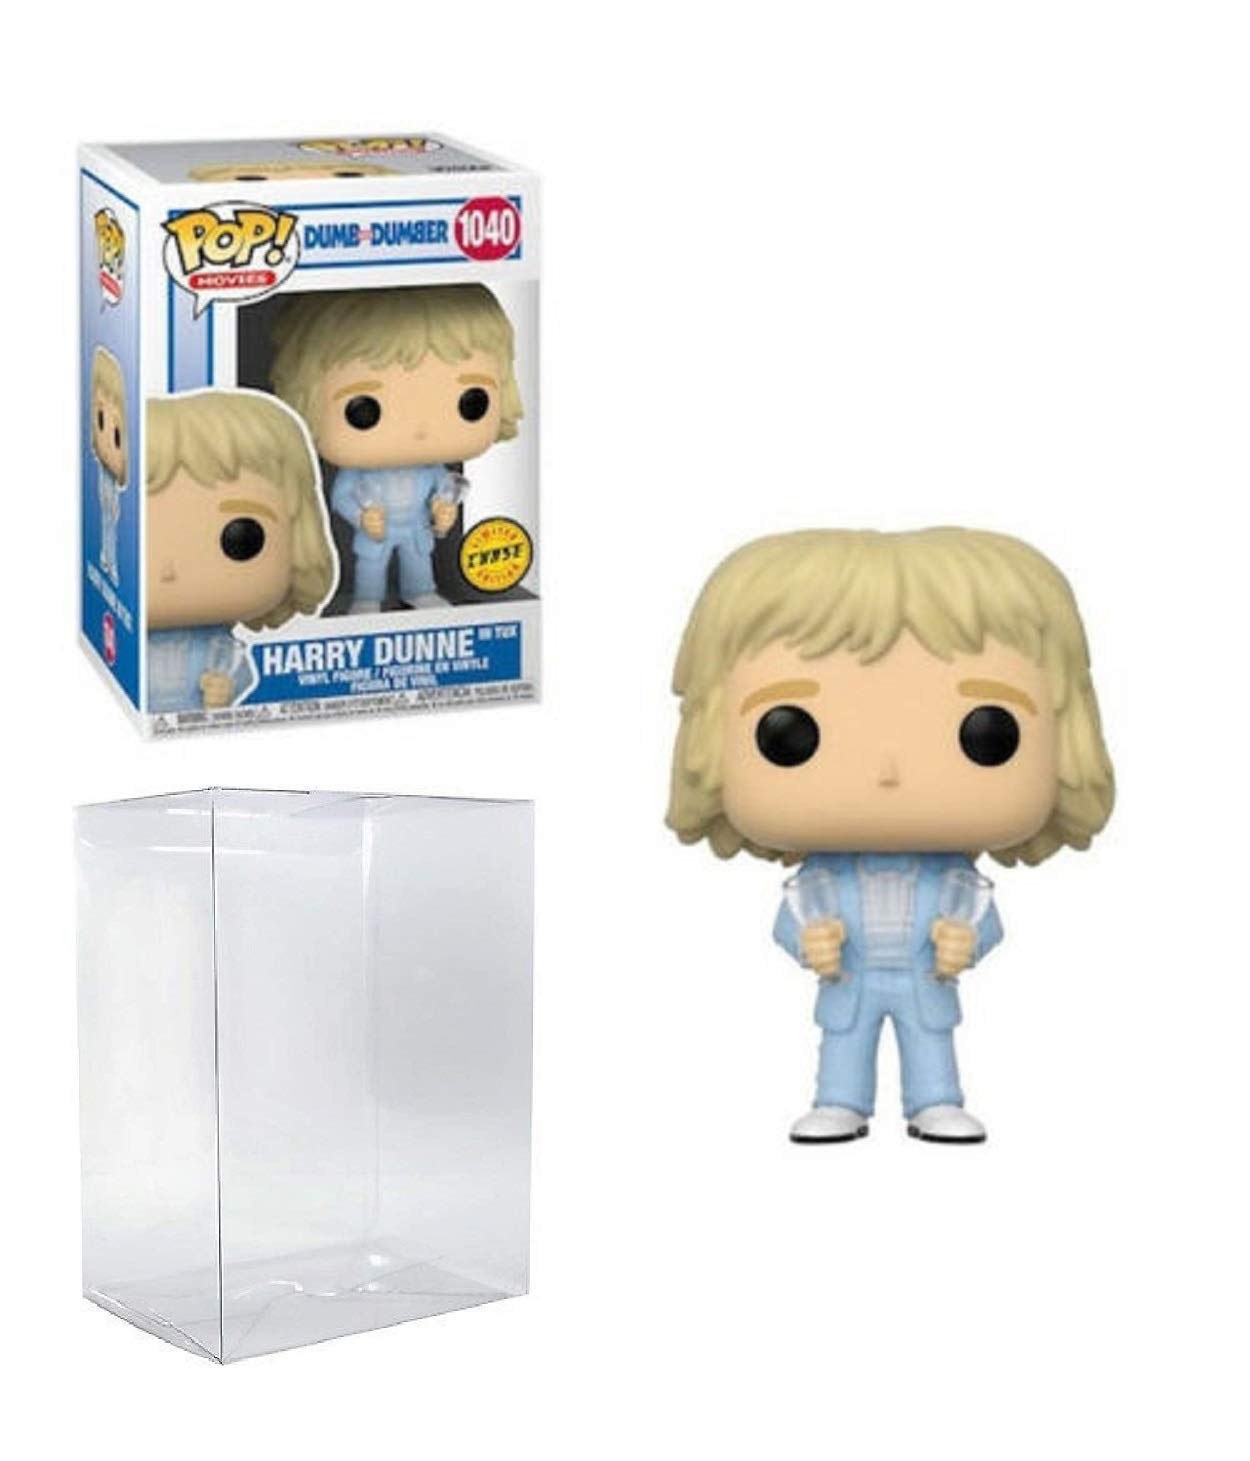 Funko POP! Movies Dumb and Dumber CHASE Harry Dunne in Tux #1040 [POP! Protector]